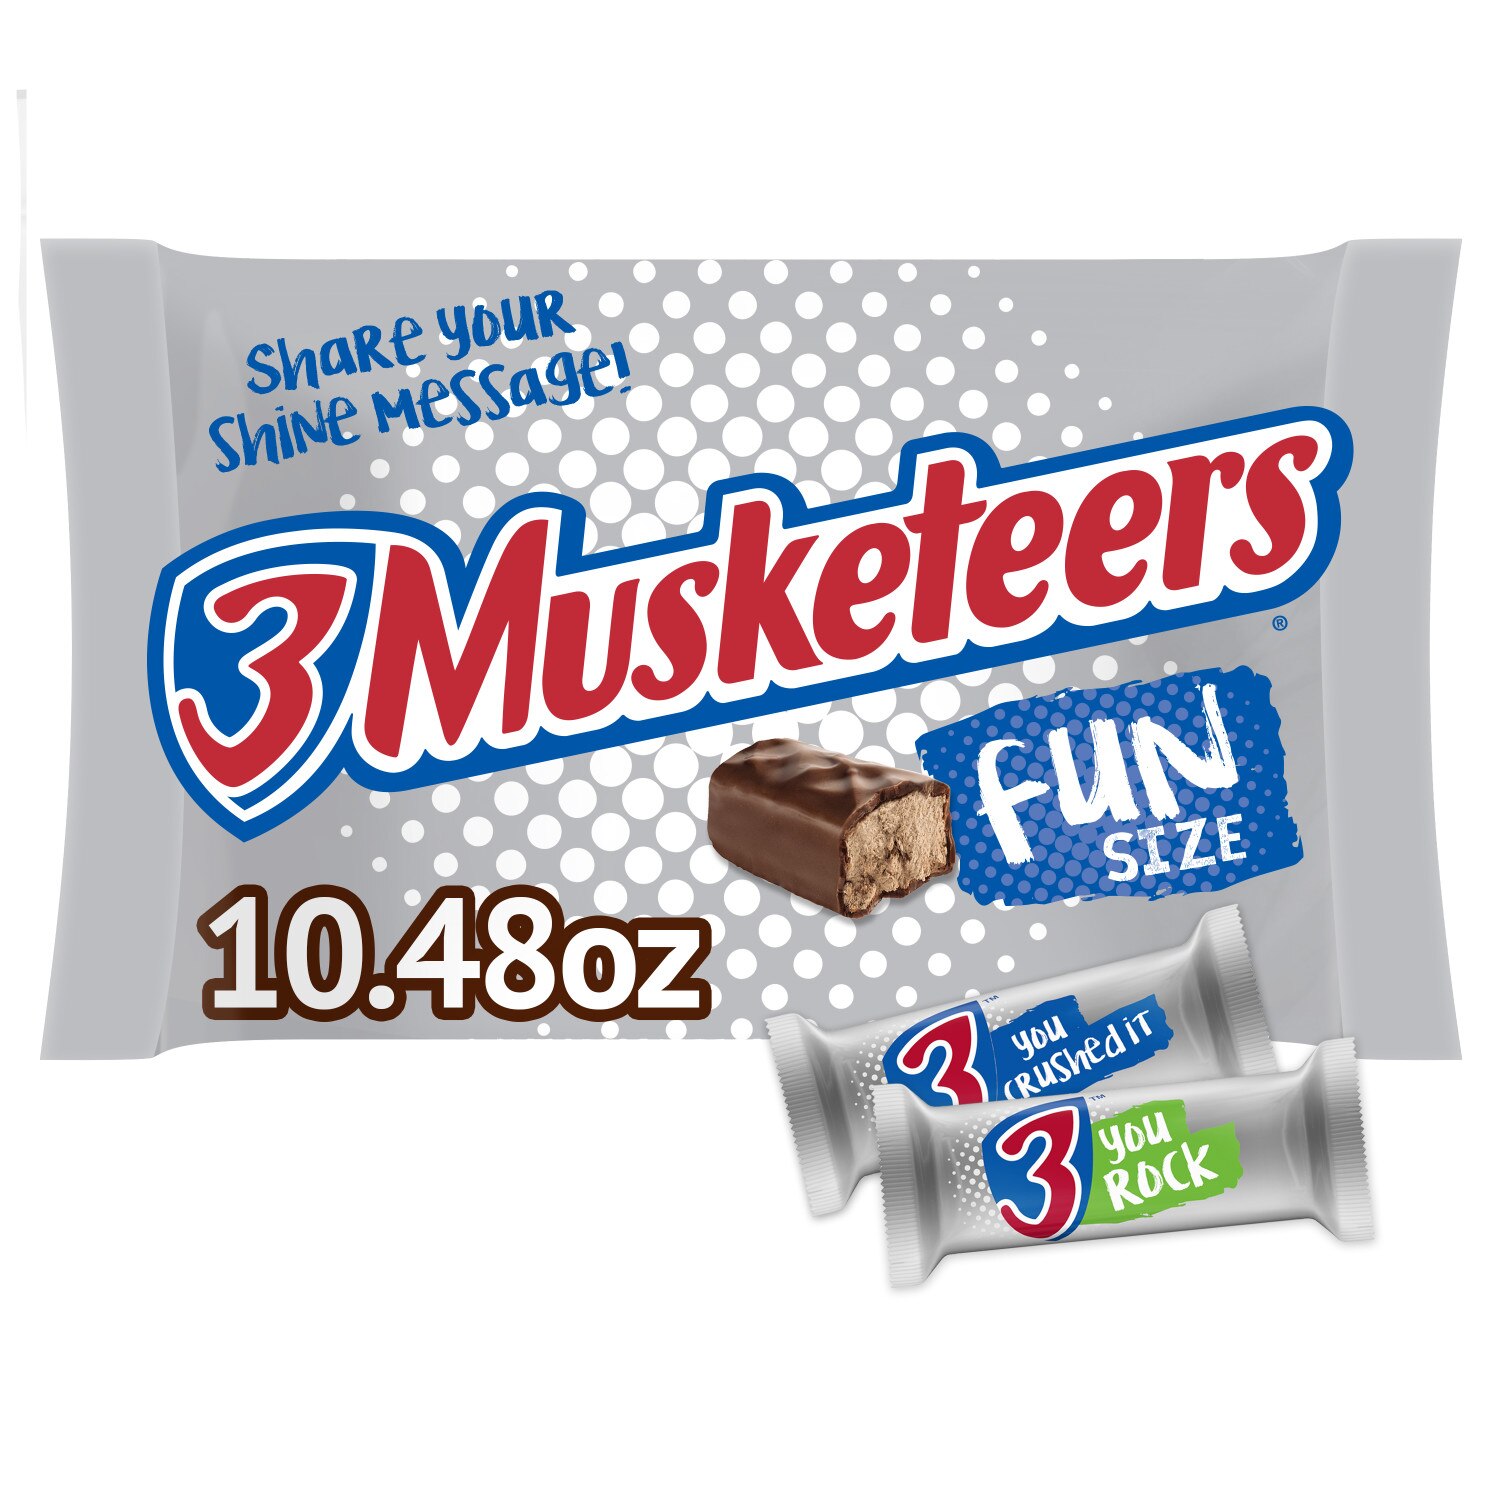 3 Musketeers, Fun Size Chocolate Candy Bars, 10.48 Oz